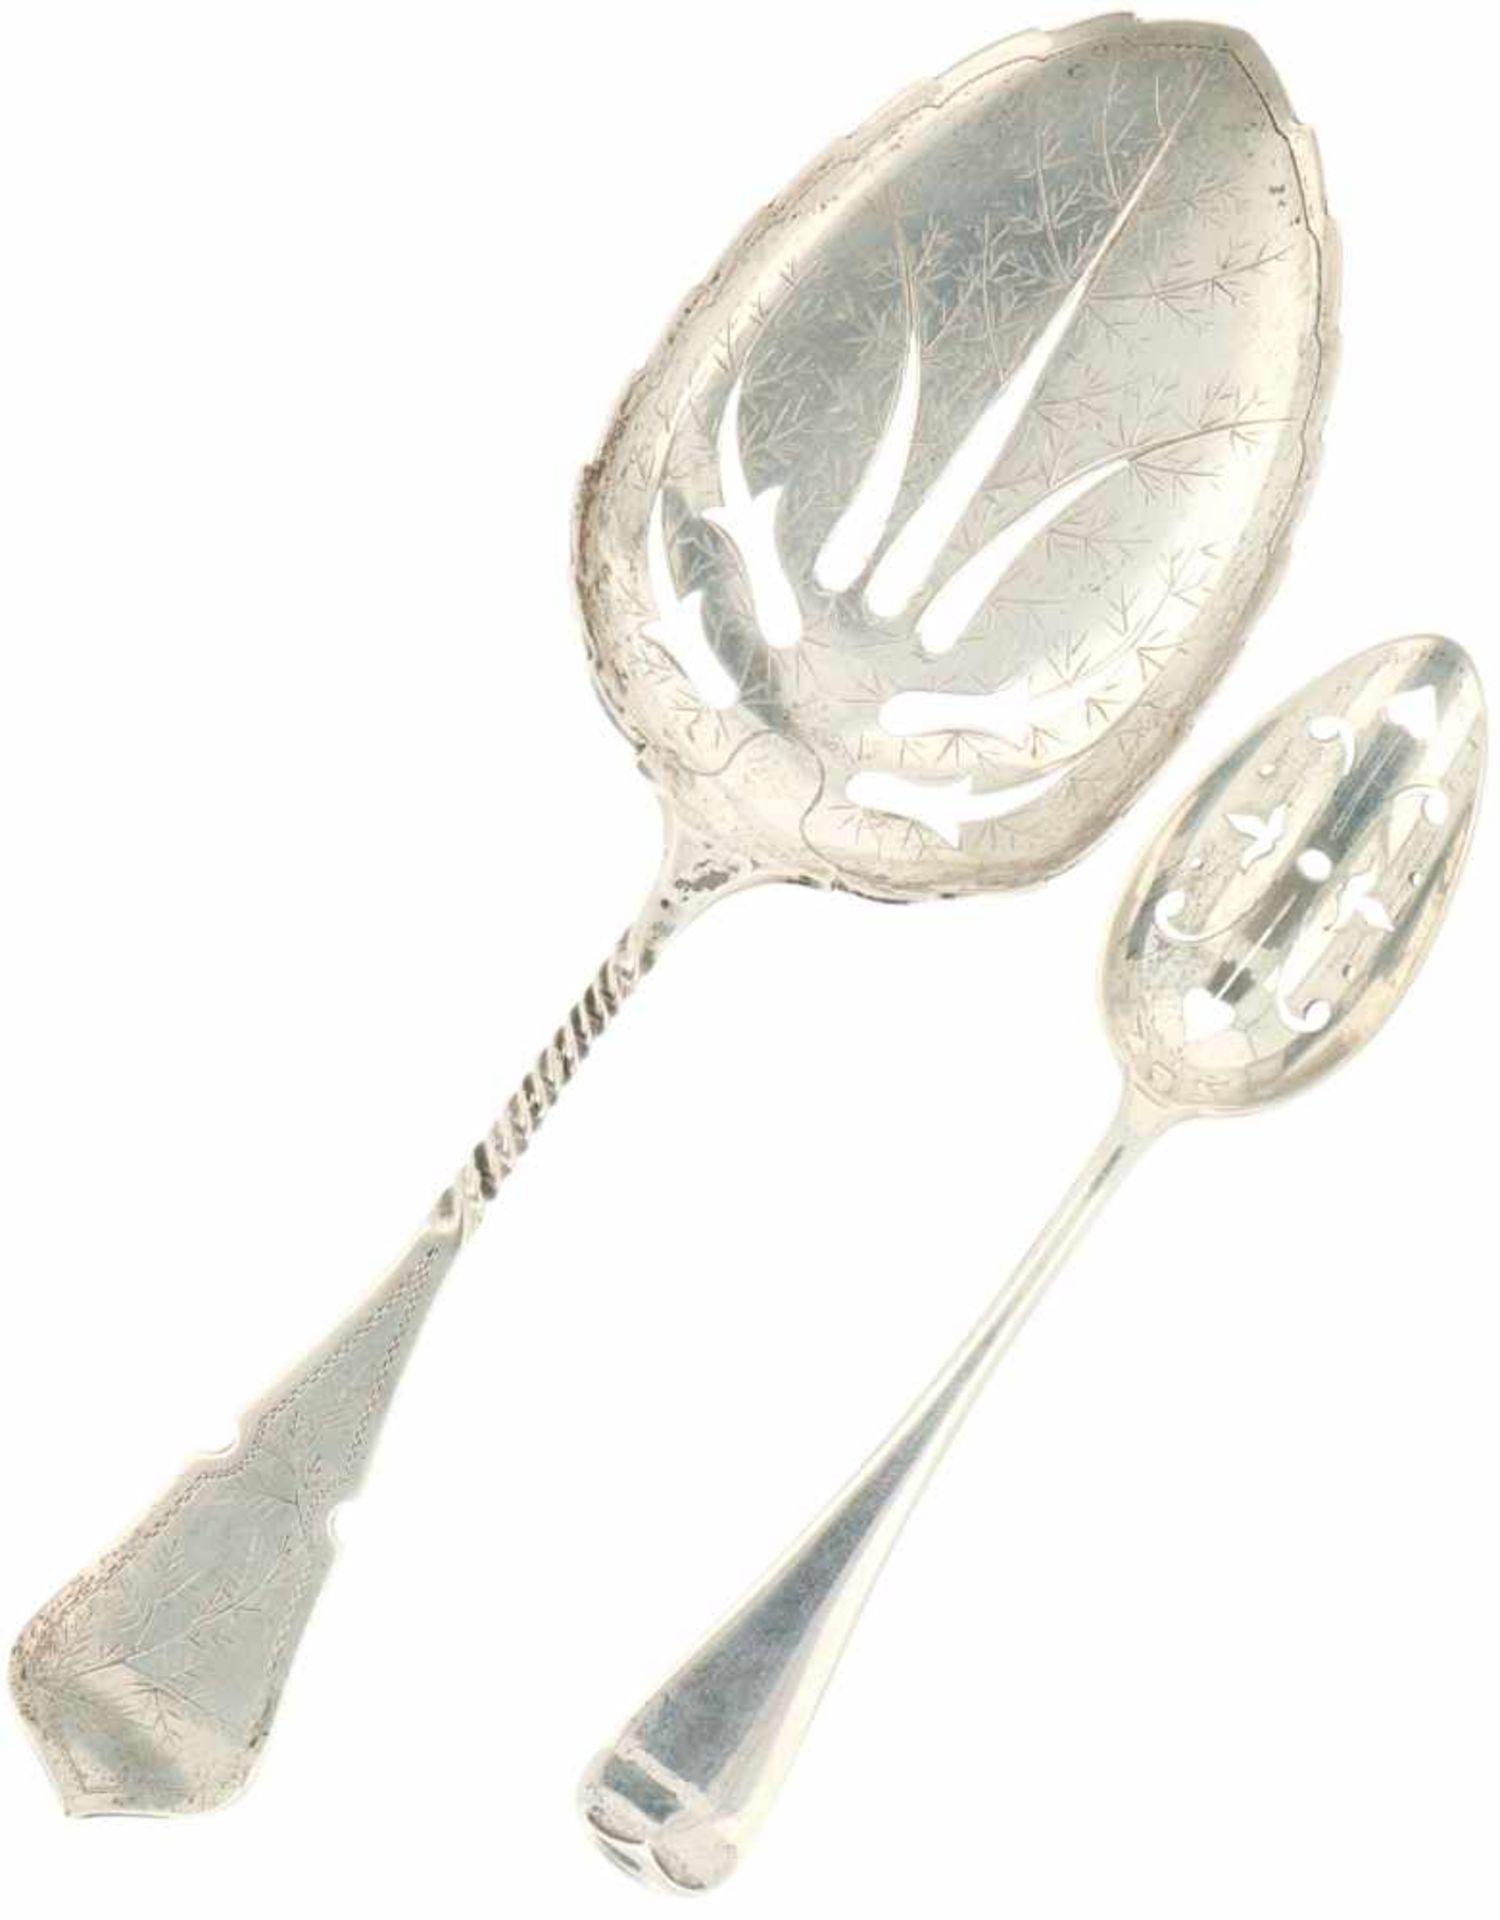 (2) Silver scoops.